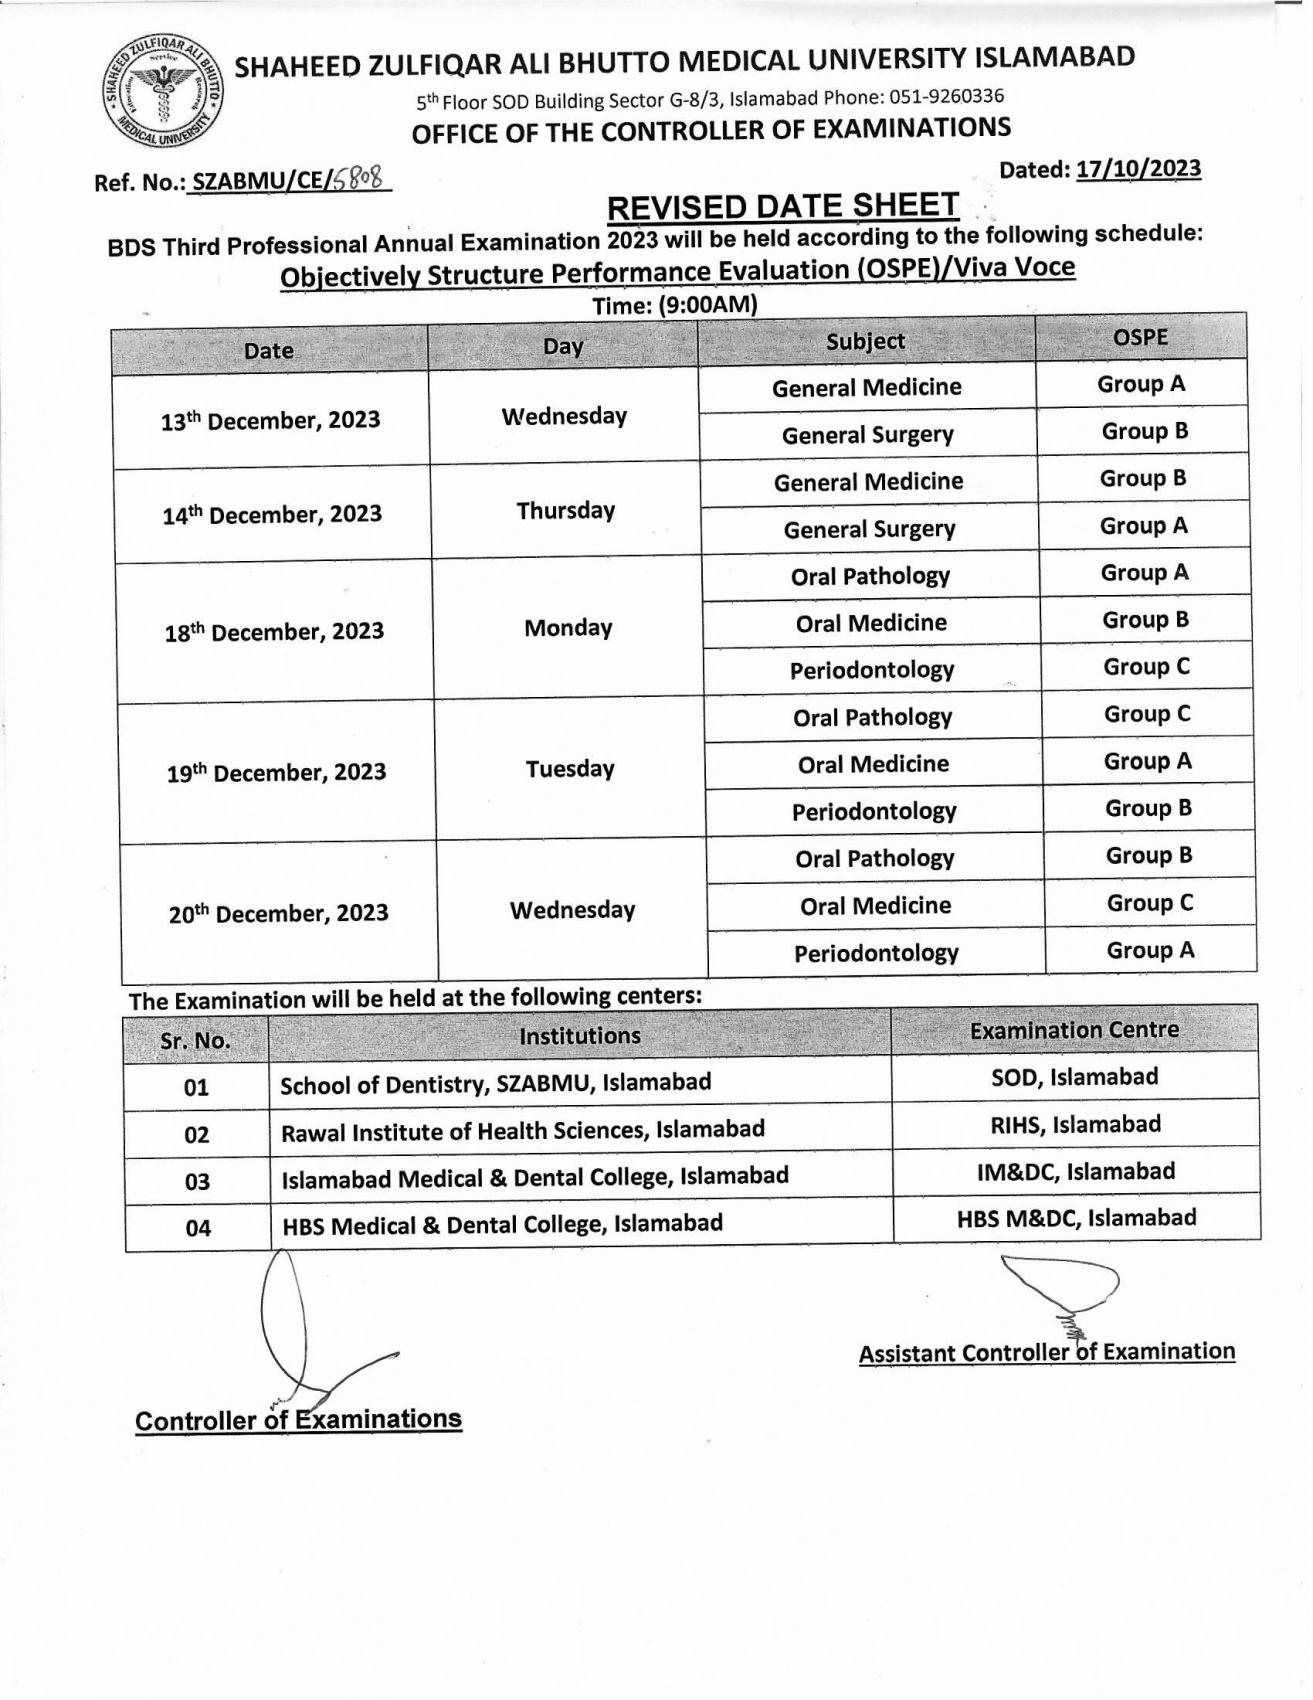 Revised Date Sheet - BDS Third Professional Annual Examination 2023